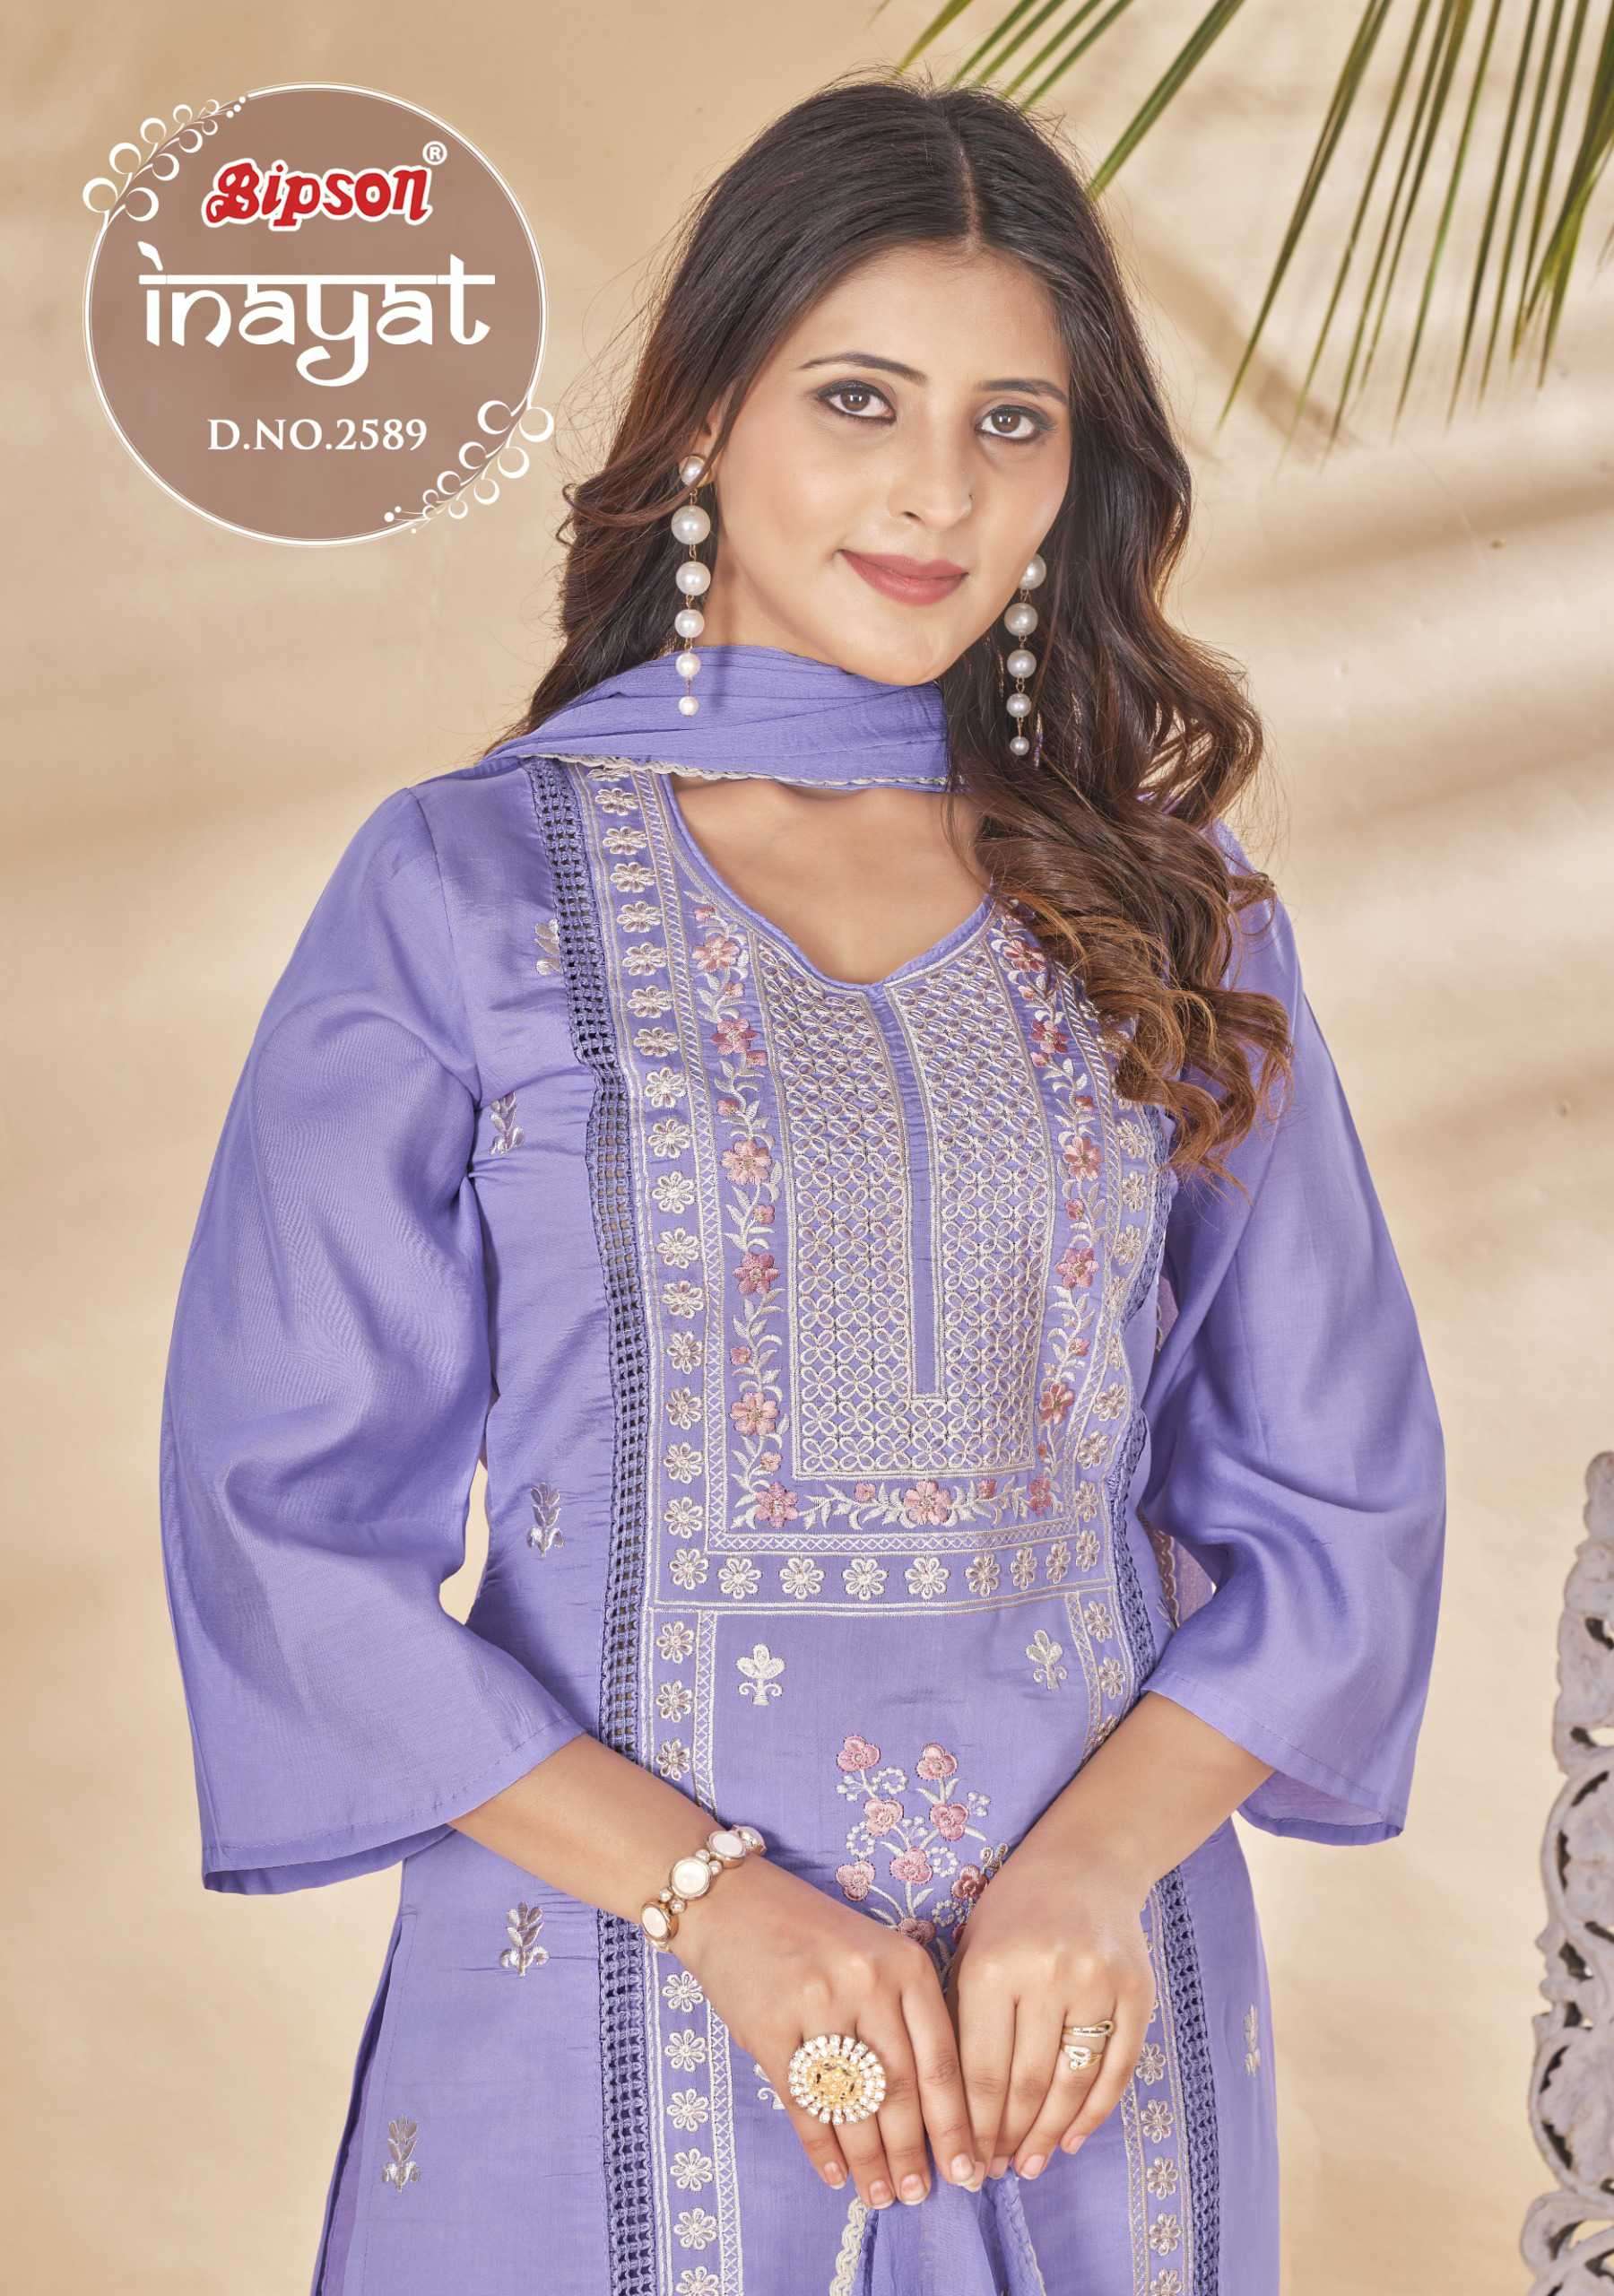 Bipson Inayat 2589 Festival Collection Ladies Dress Catalog Suppliers